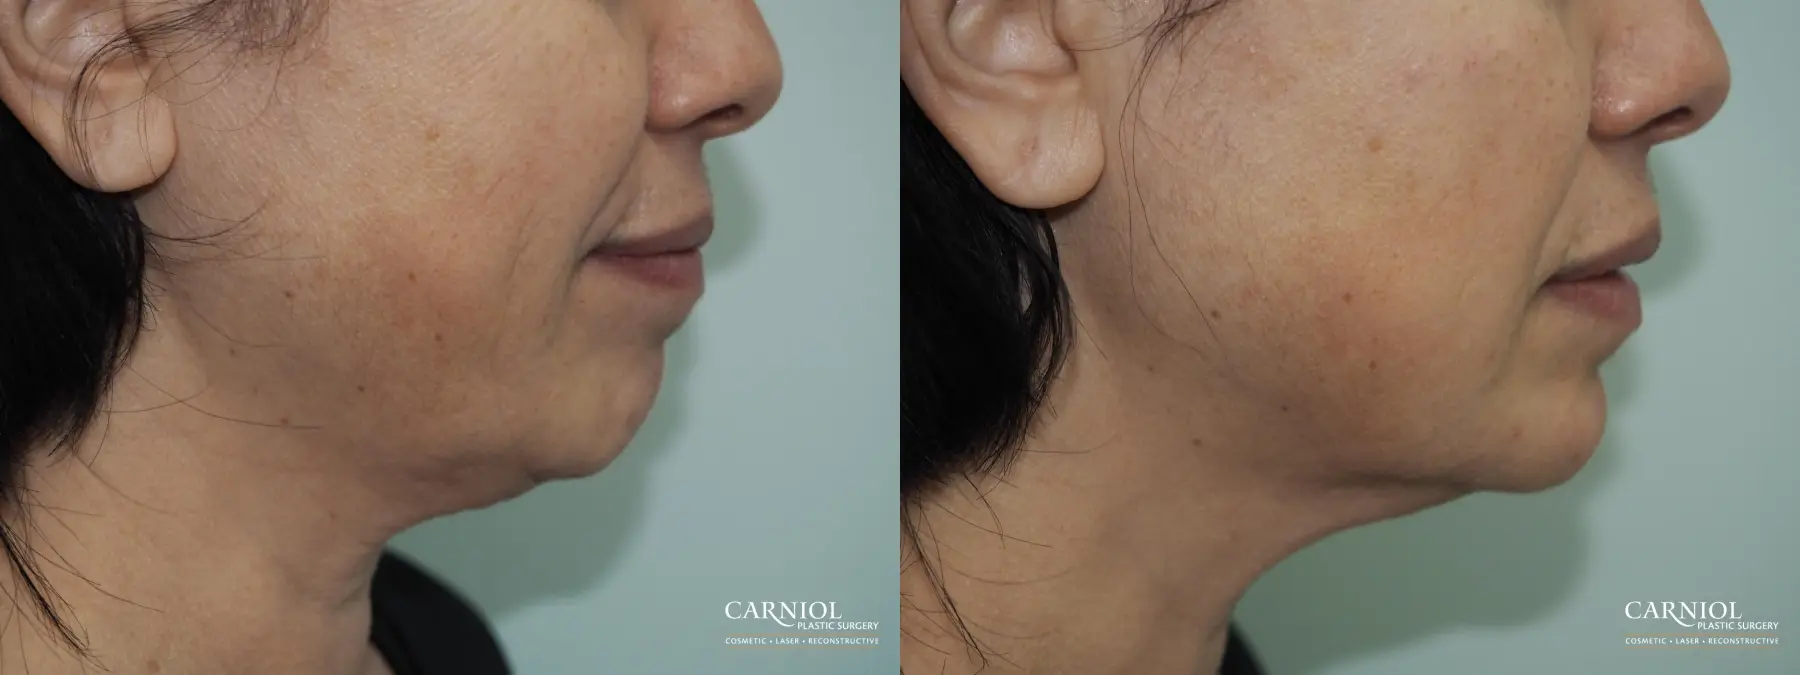 Non-Surgical Facelift: Patient 3 - Before and After 1